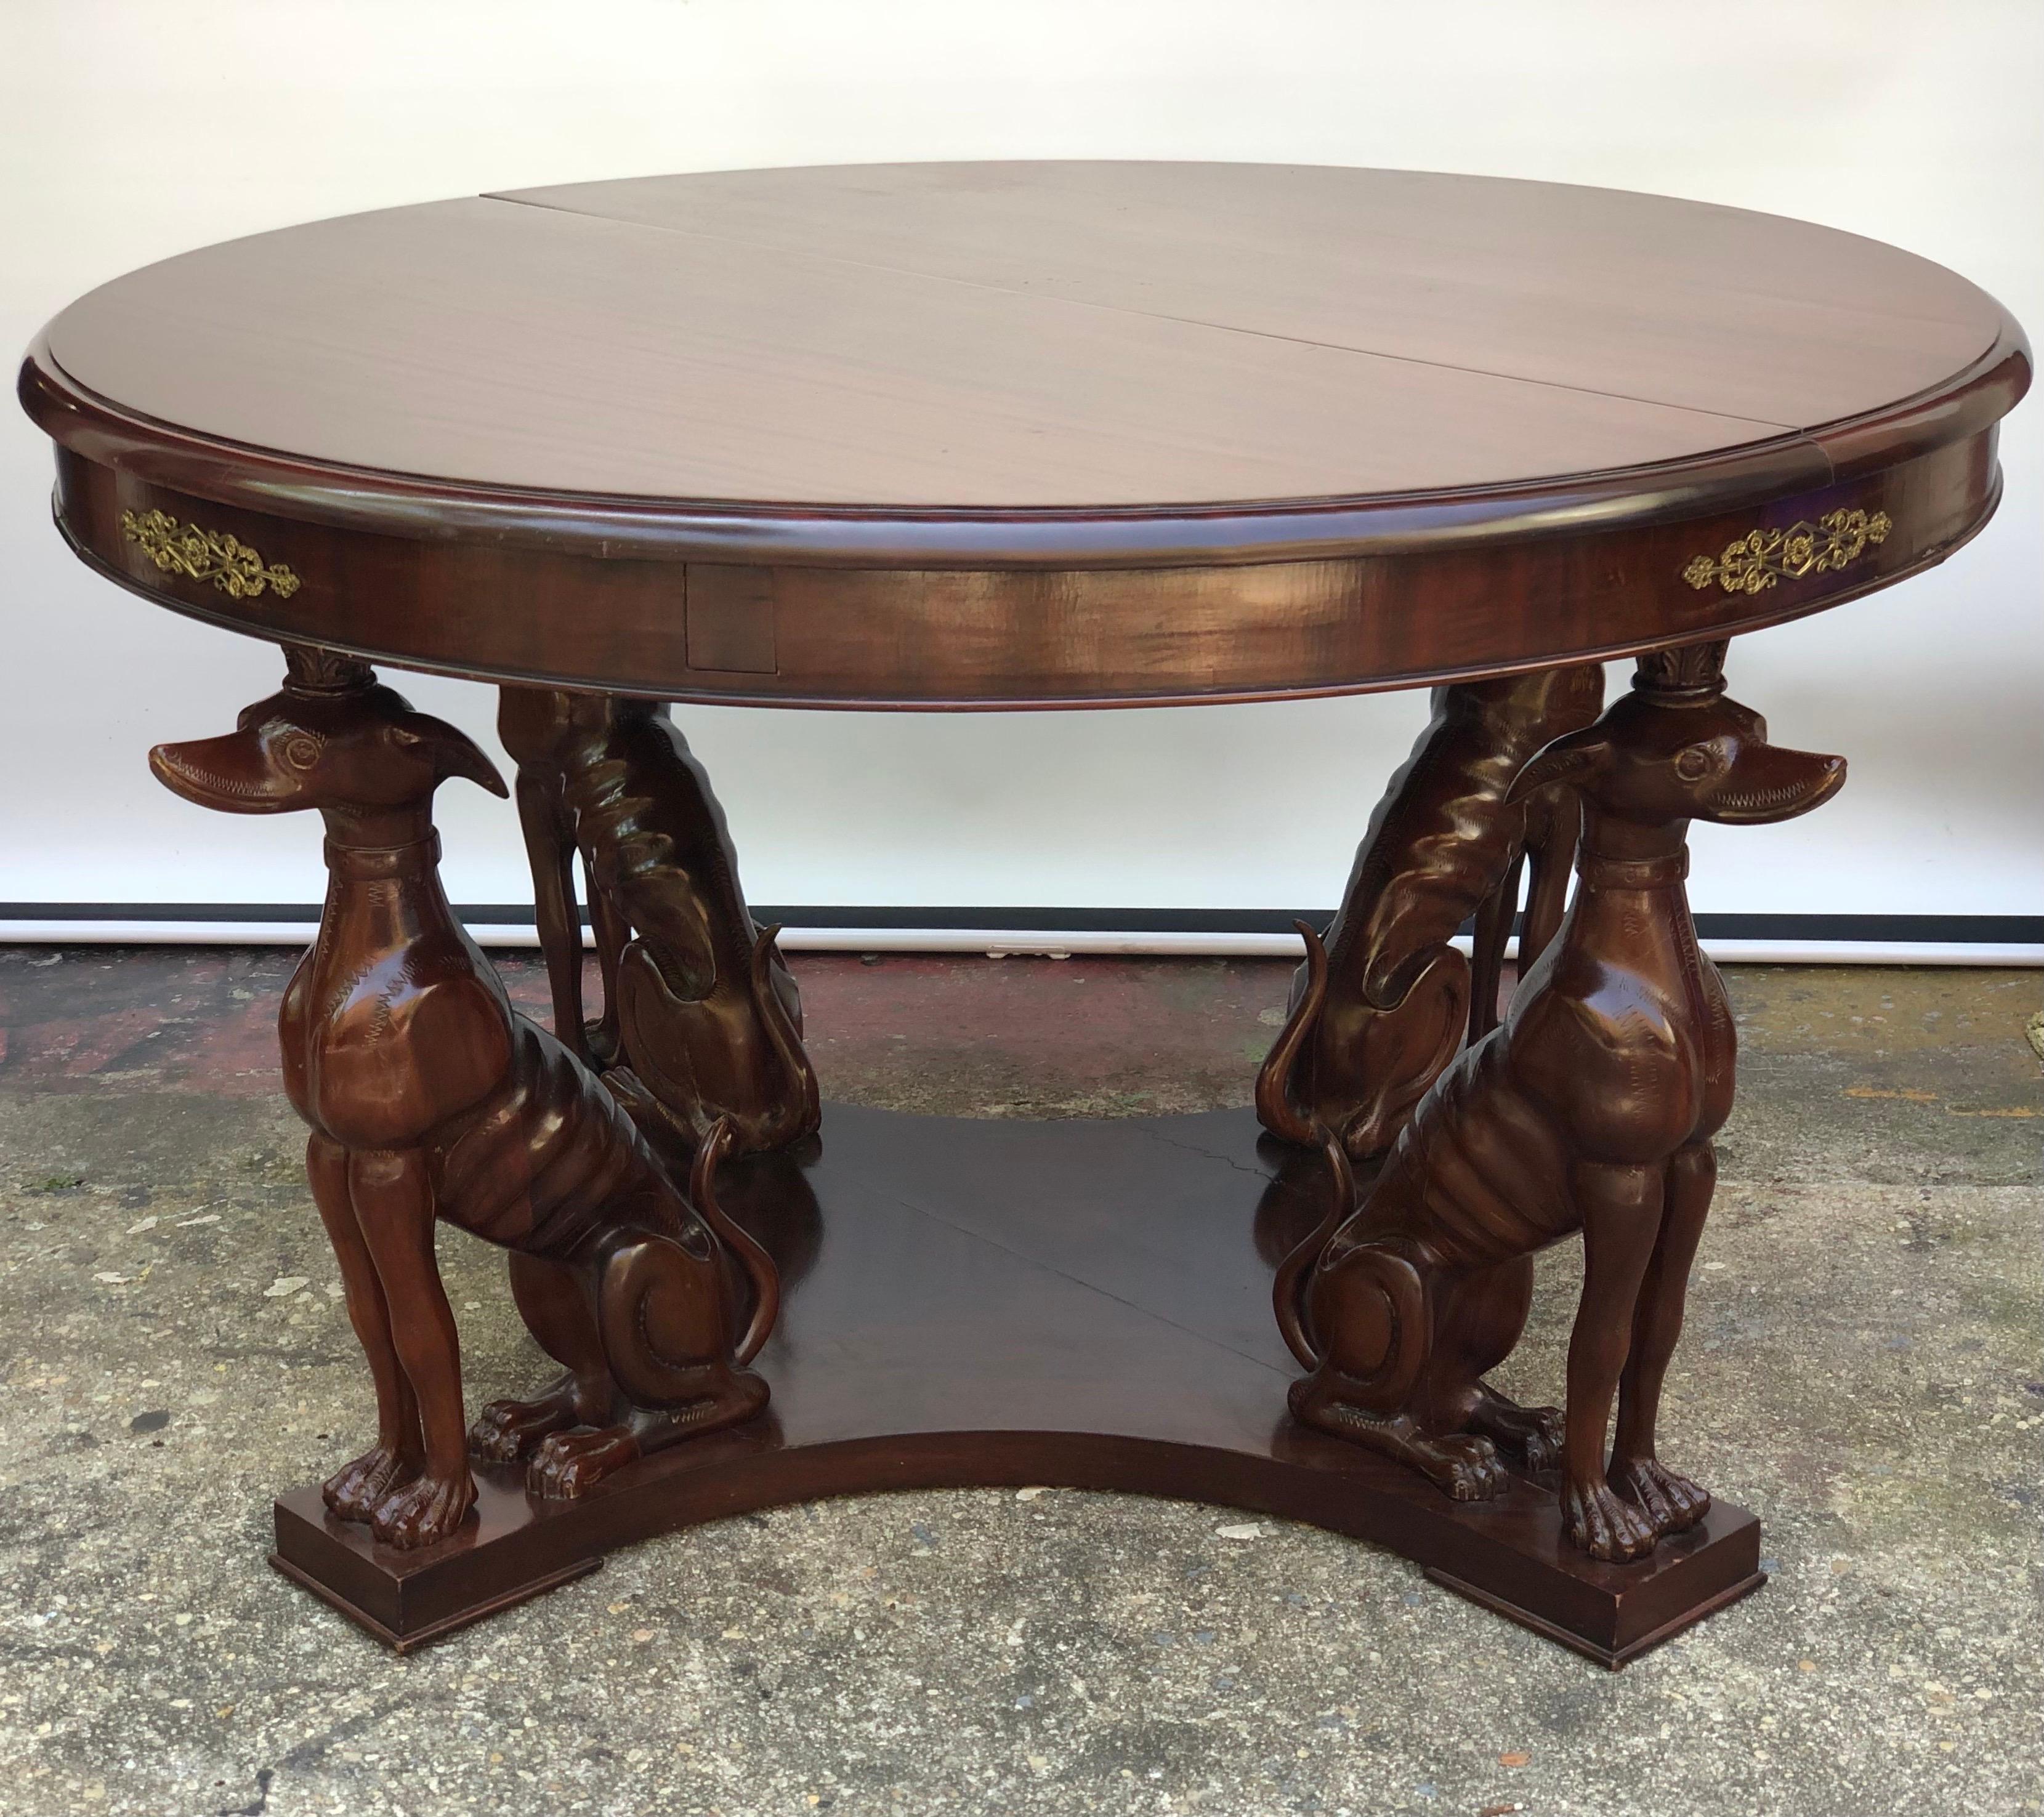 Regal Neapolitan style Art Deco whippet center table with bronze mounts made in the 1920s - 1930s. The round mahogany top is supported by four carved mahogany whimsical Whippets supporting a mahogany frieze with bronze mounts. The Deco Whippet Round